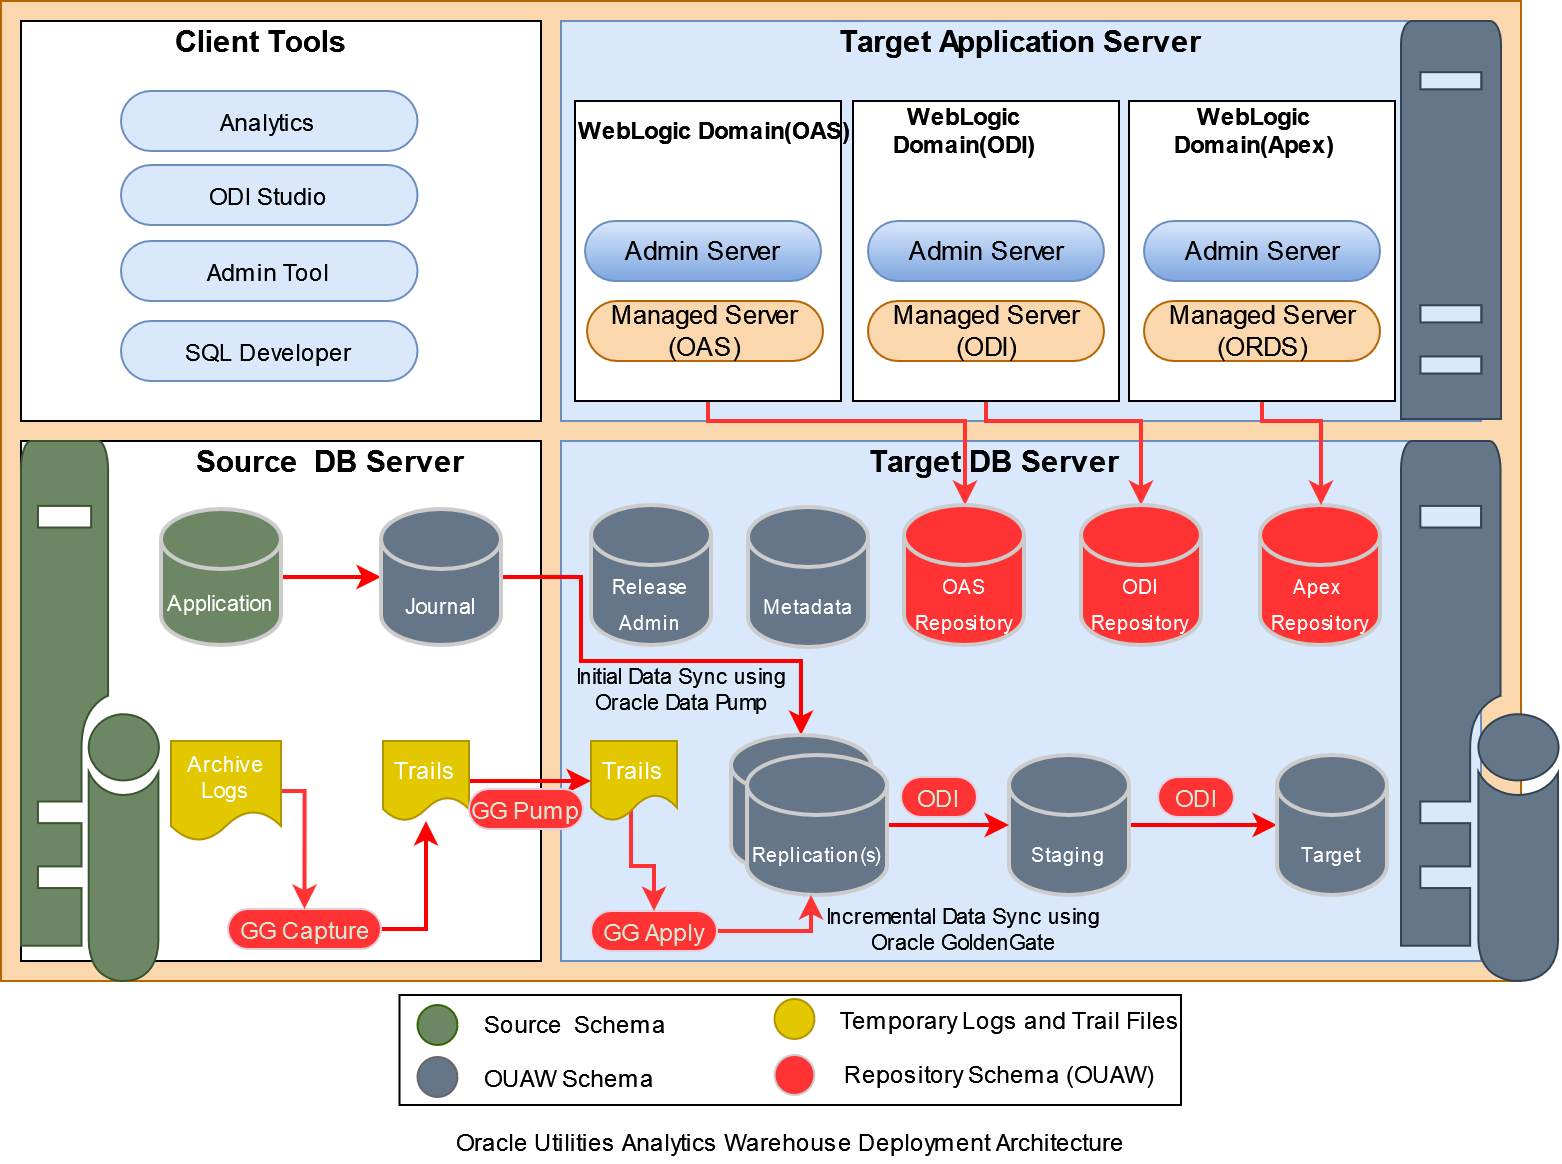 Depicts a standard deployment of the Oracle Utilities Analytics product.